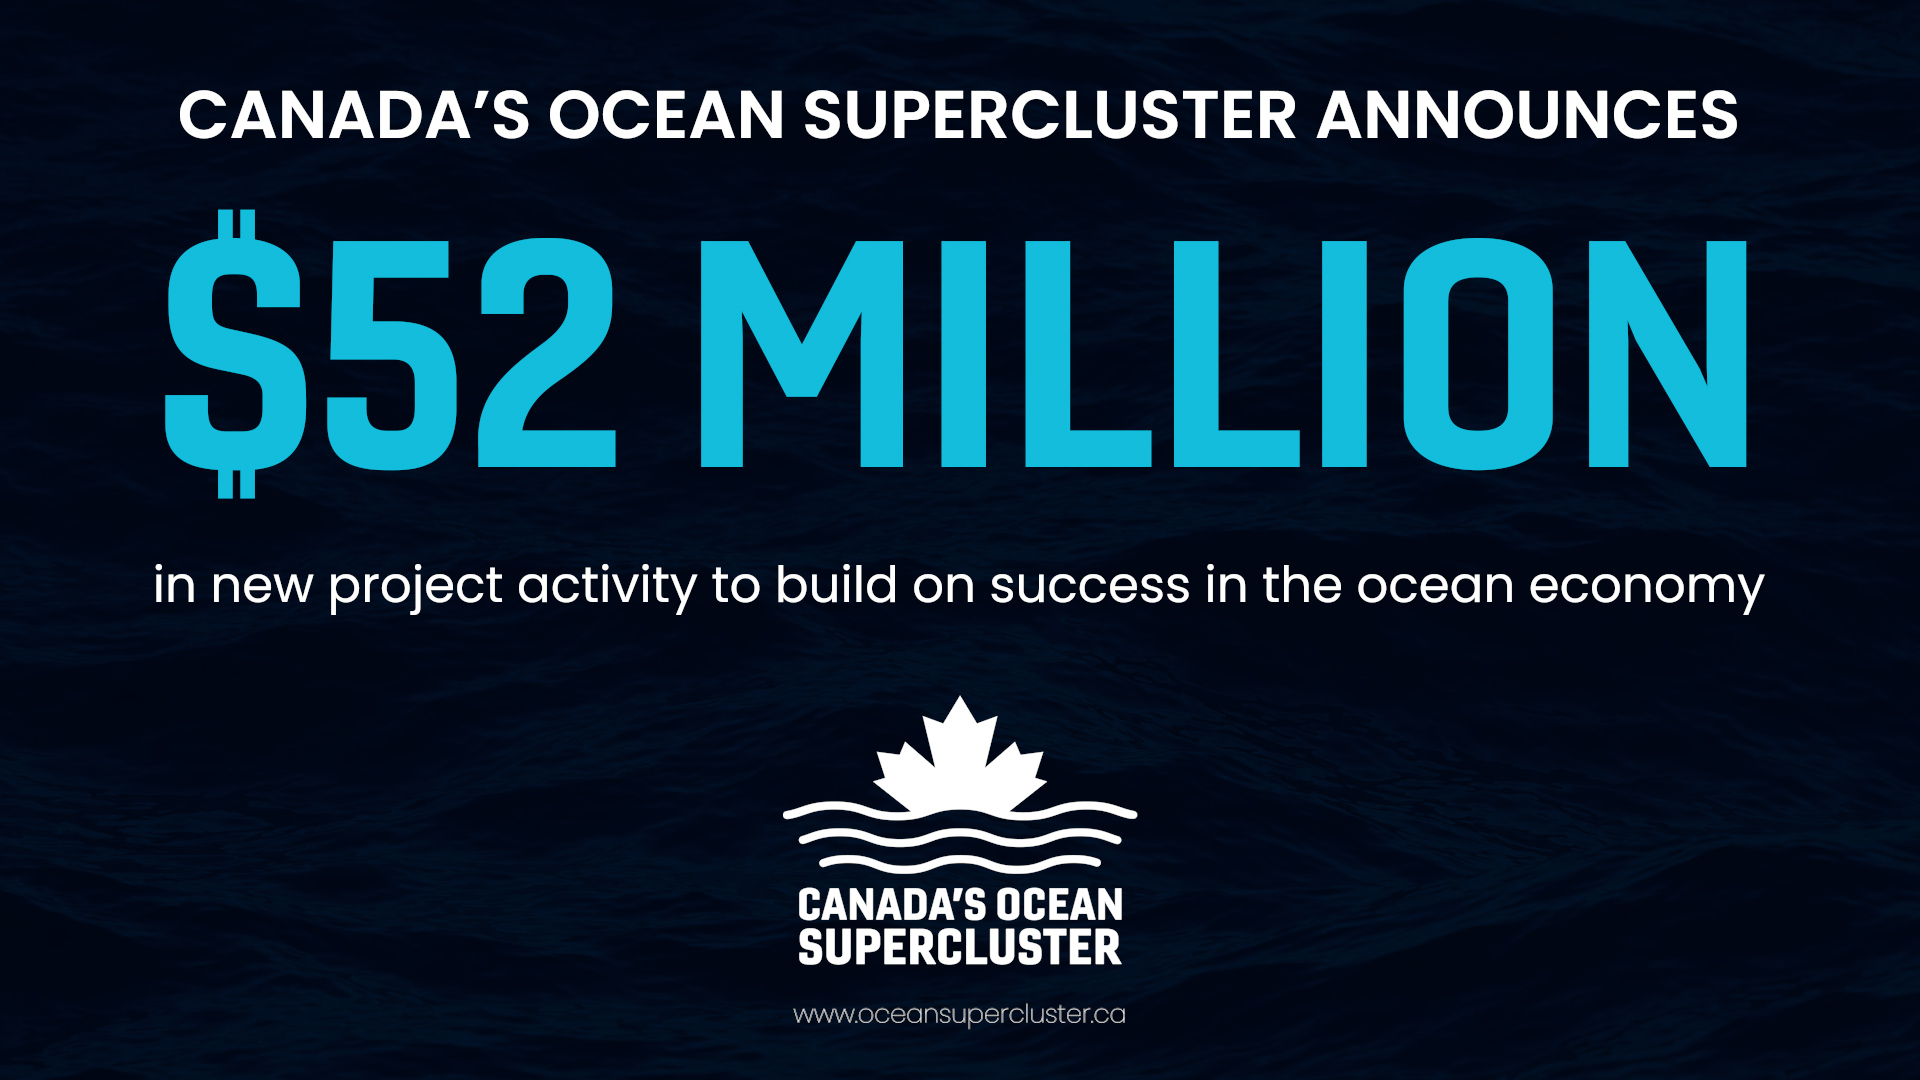 Canada’s Ocean Supercluster announces $52M in new project activity to build on success in the ocean economy